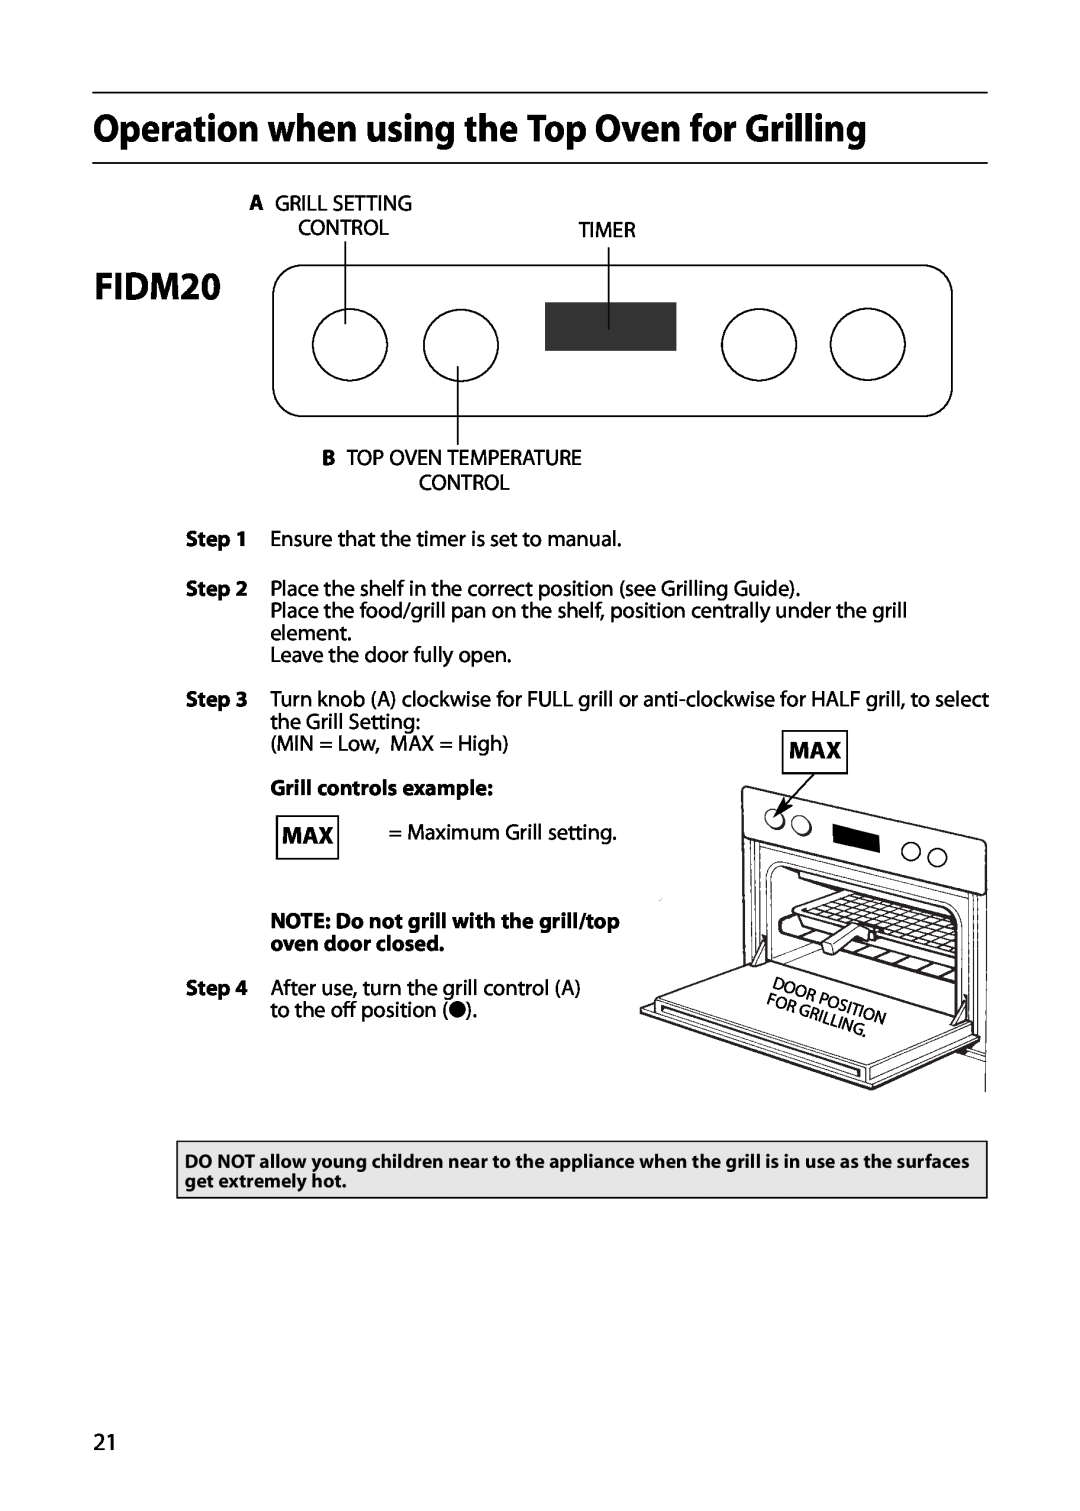 Indesit FIDM20 Mk2, FID20 Mk2 manual Operation when using the Top Oven for Grilling 